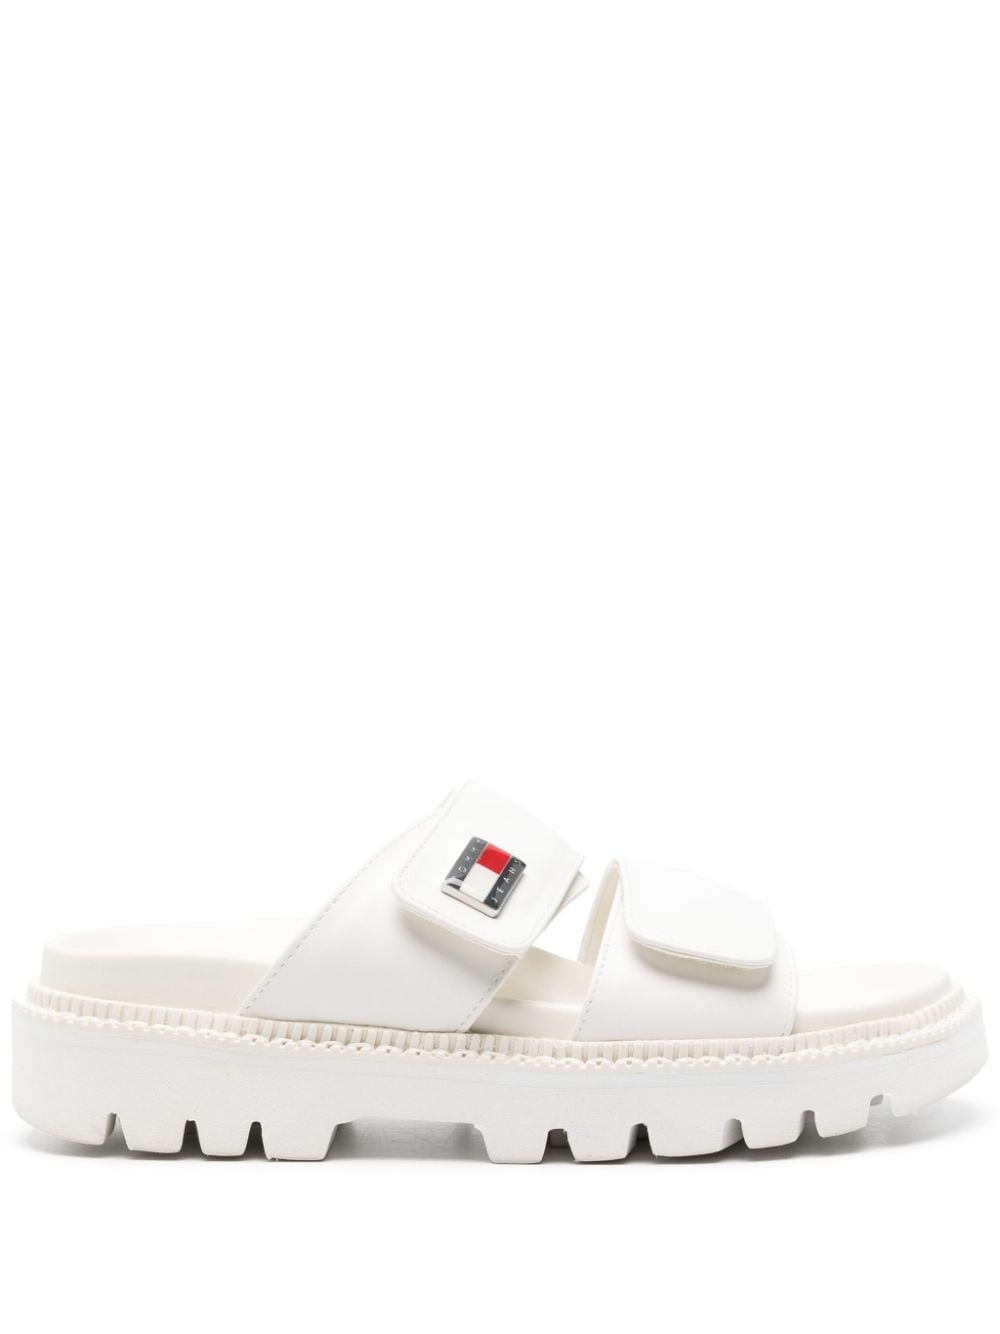 Tommy Jeans logo-plaque padded sandal - White von Tommy Jeans